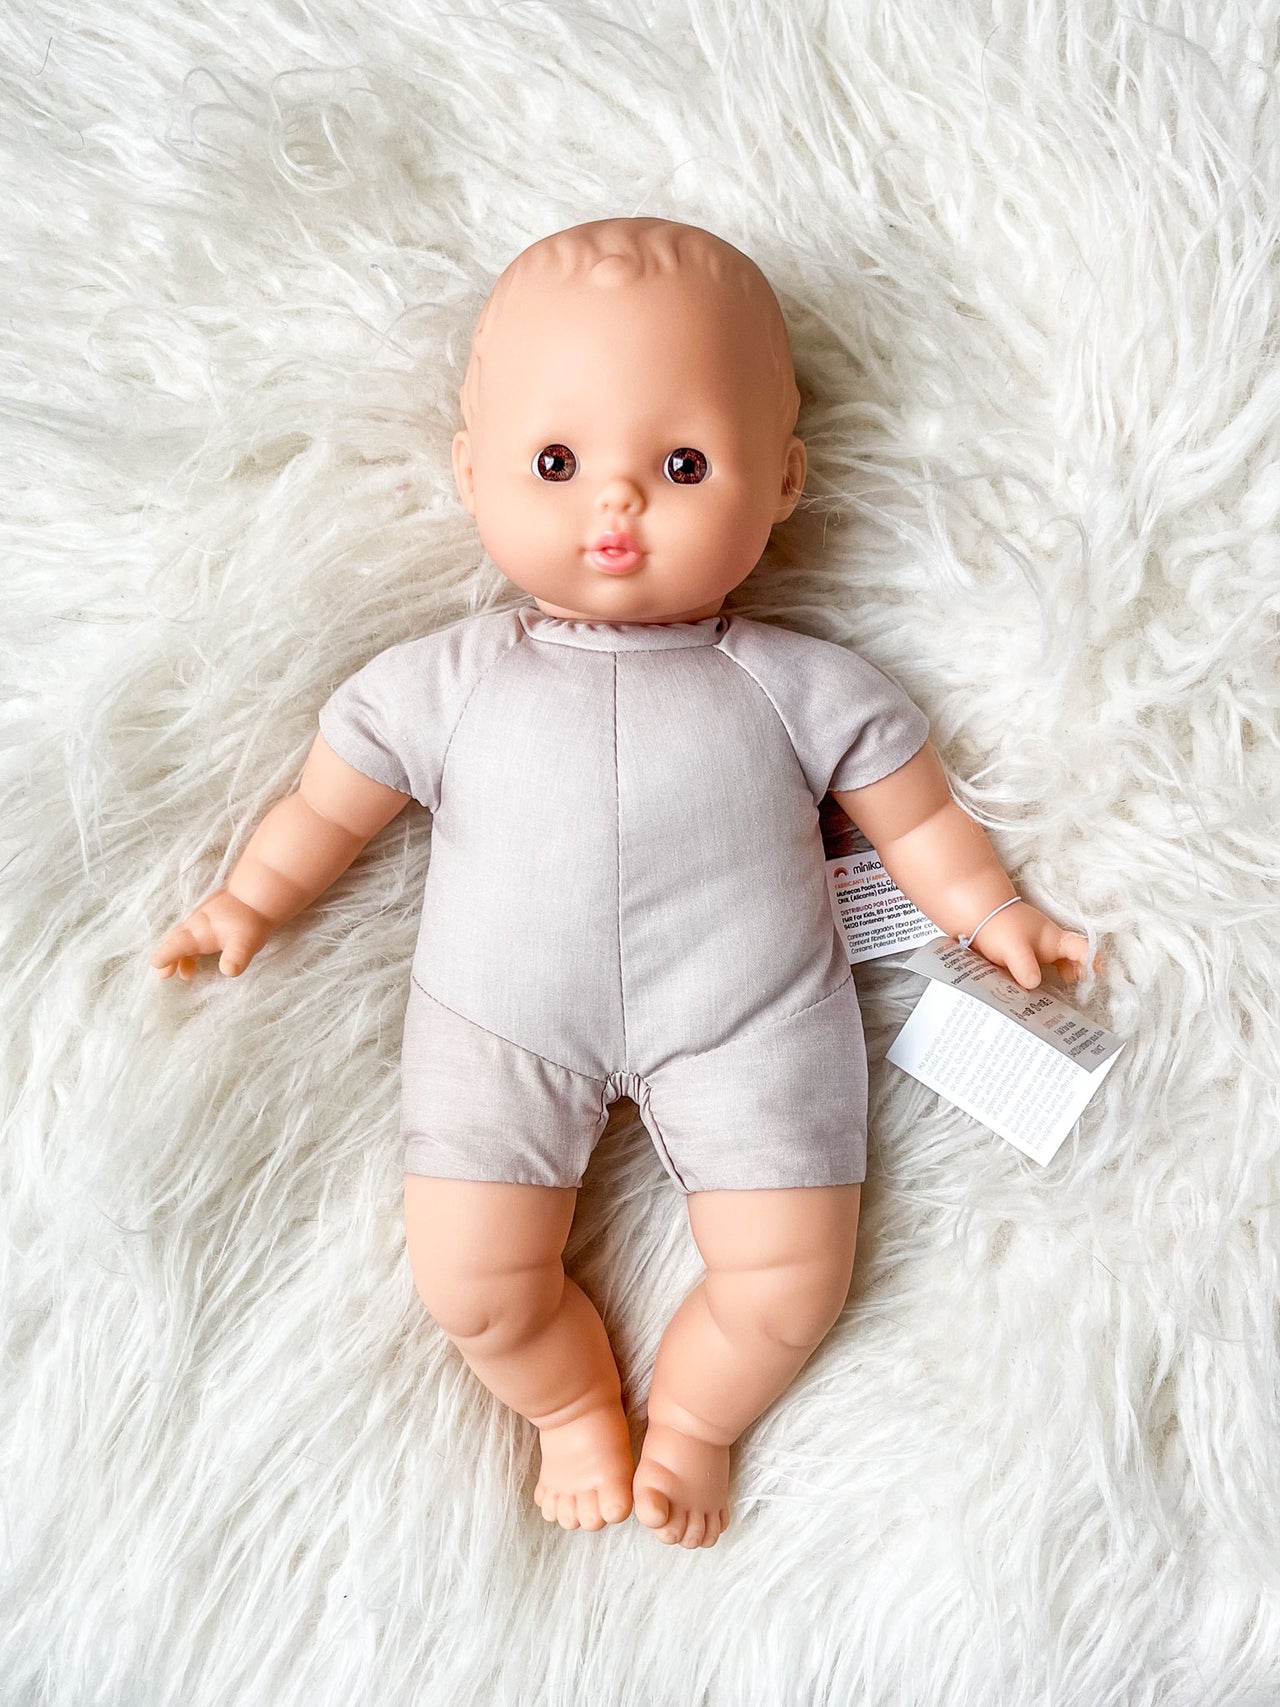 Lucien - Vintage Soft Body Baby Doll